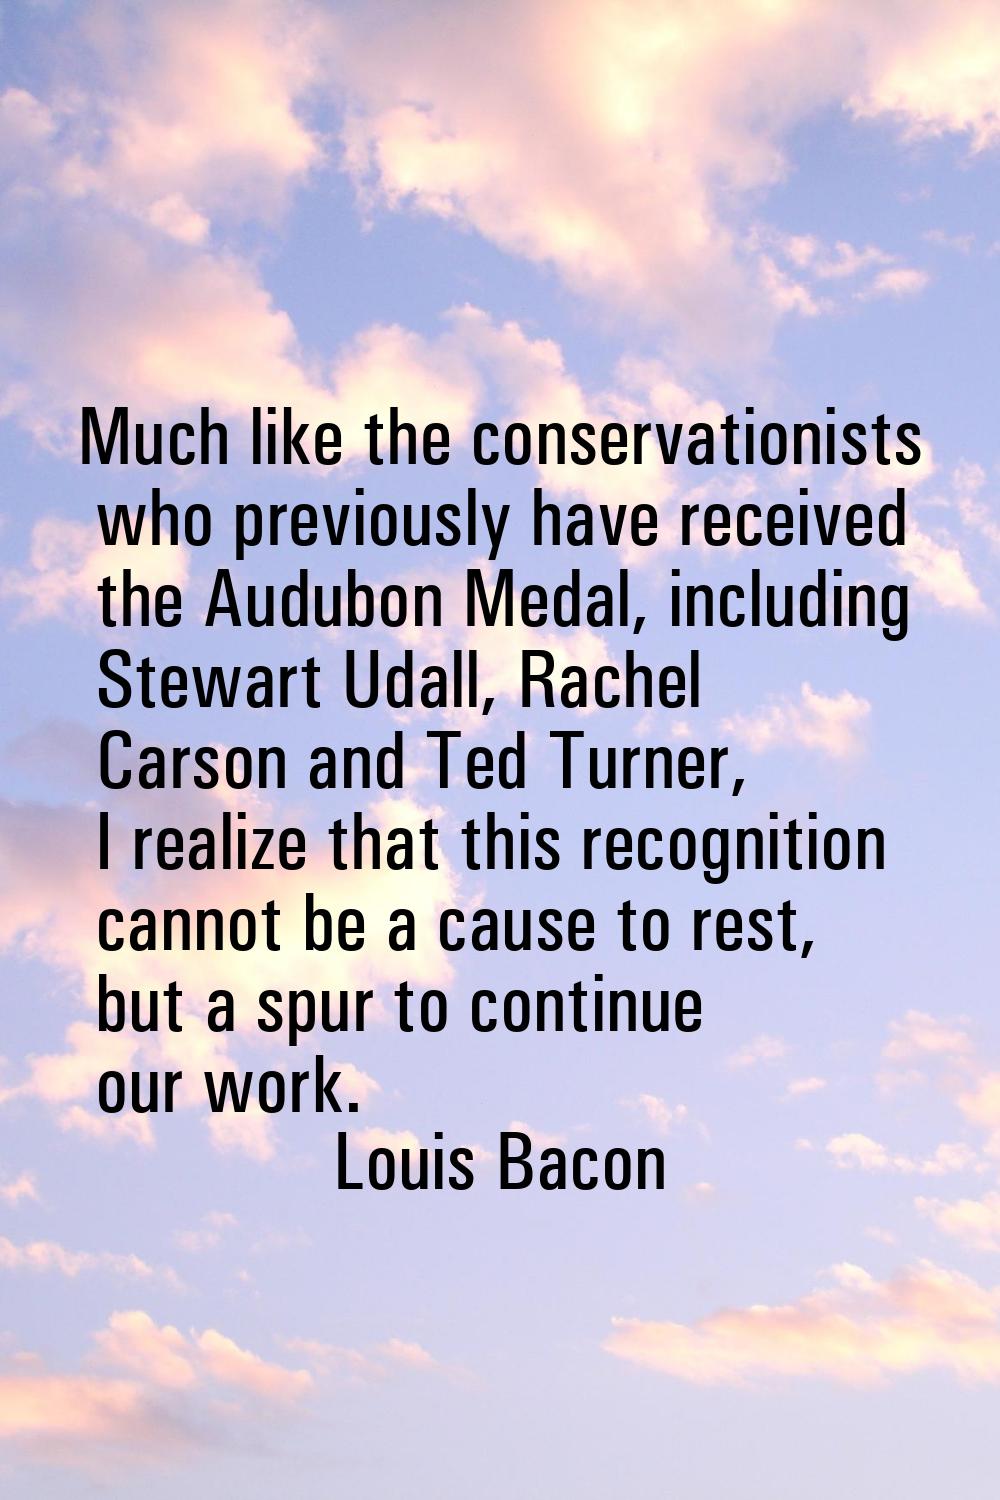 Much like the conservationists who previously have received the Audubon Medal, including Stewart Ud